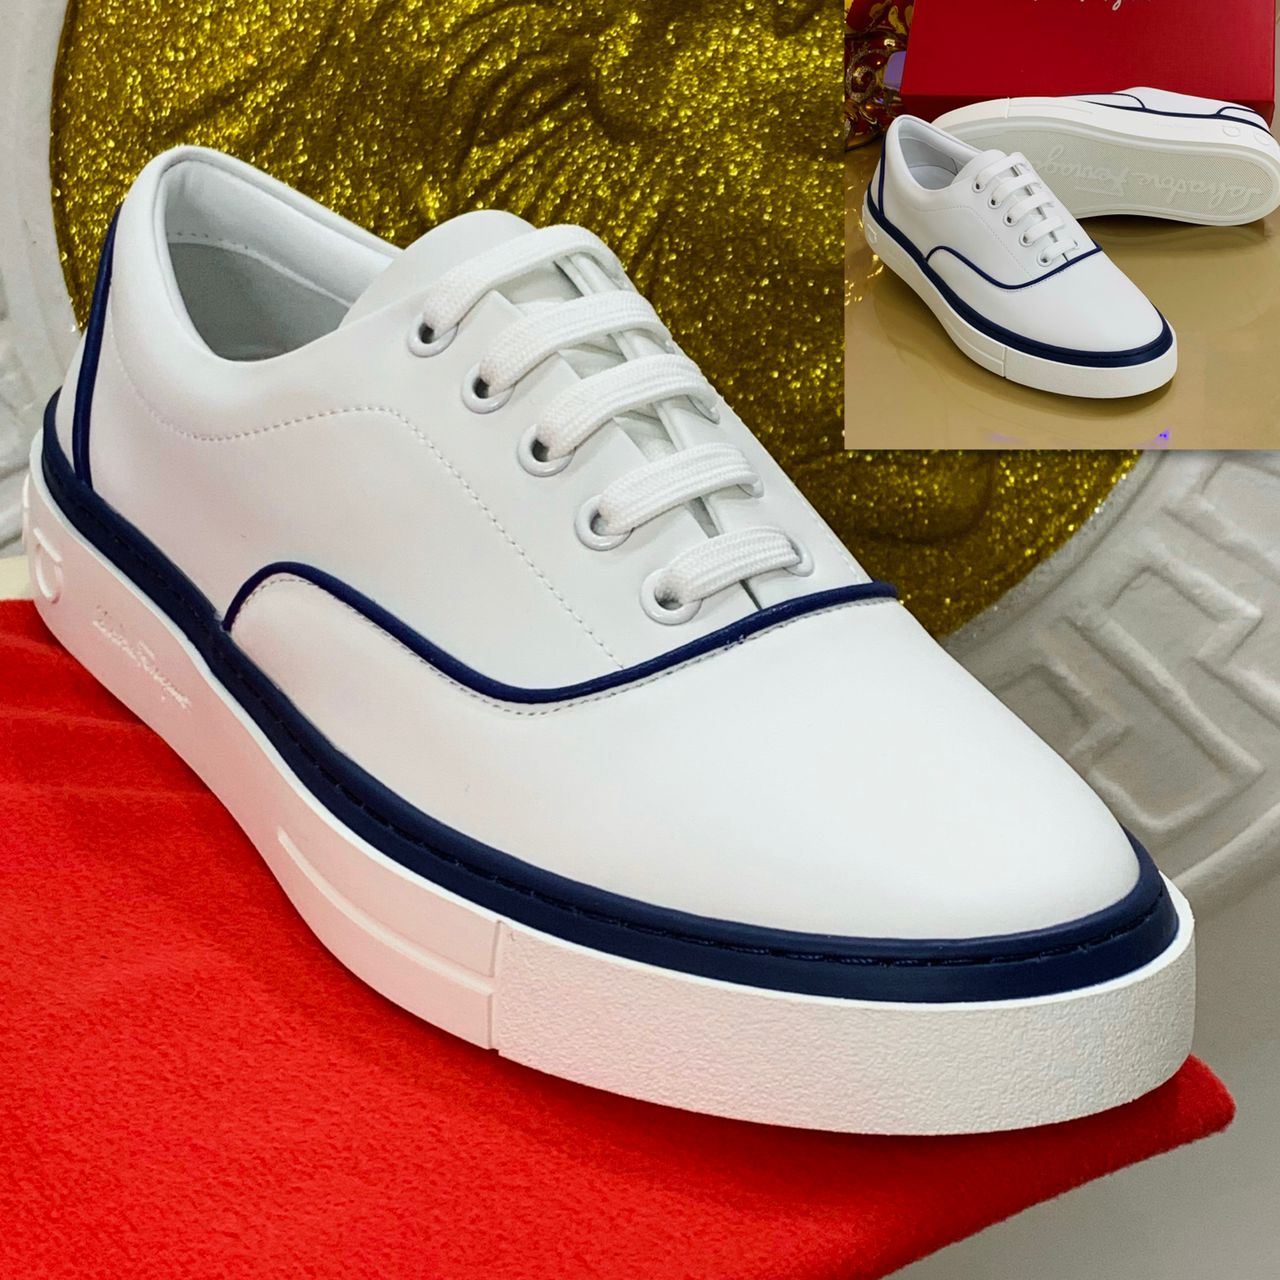 QUALITY STREAK DESIGNED WHITE HIGH-TOP SNEAKERS